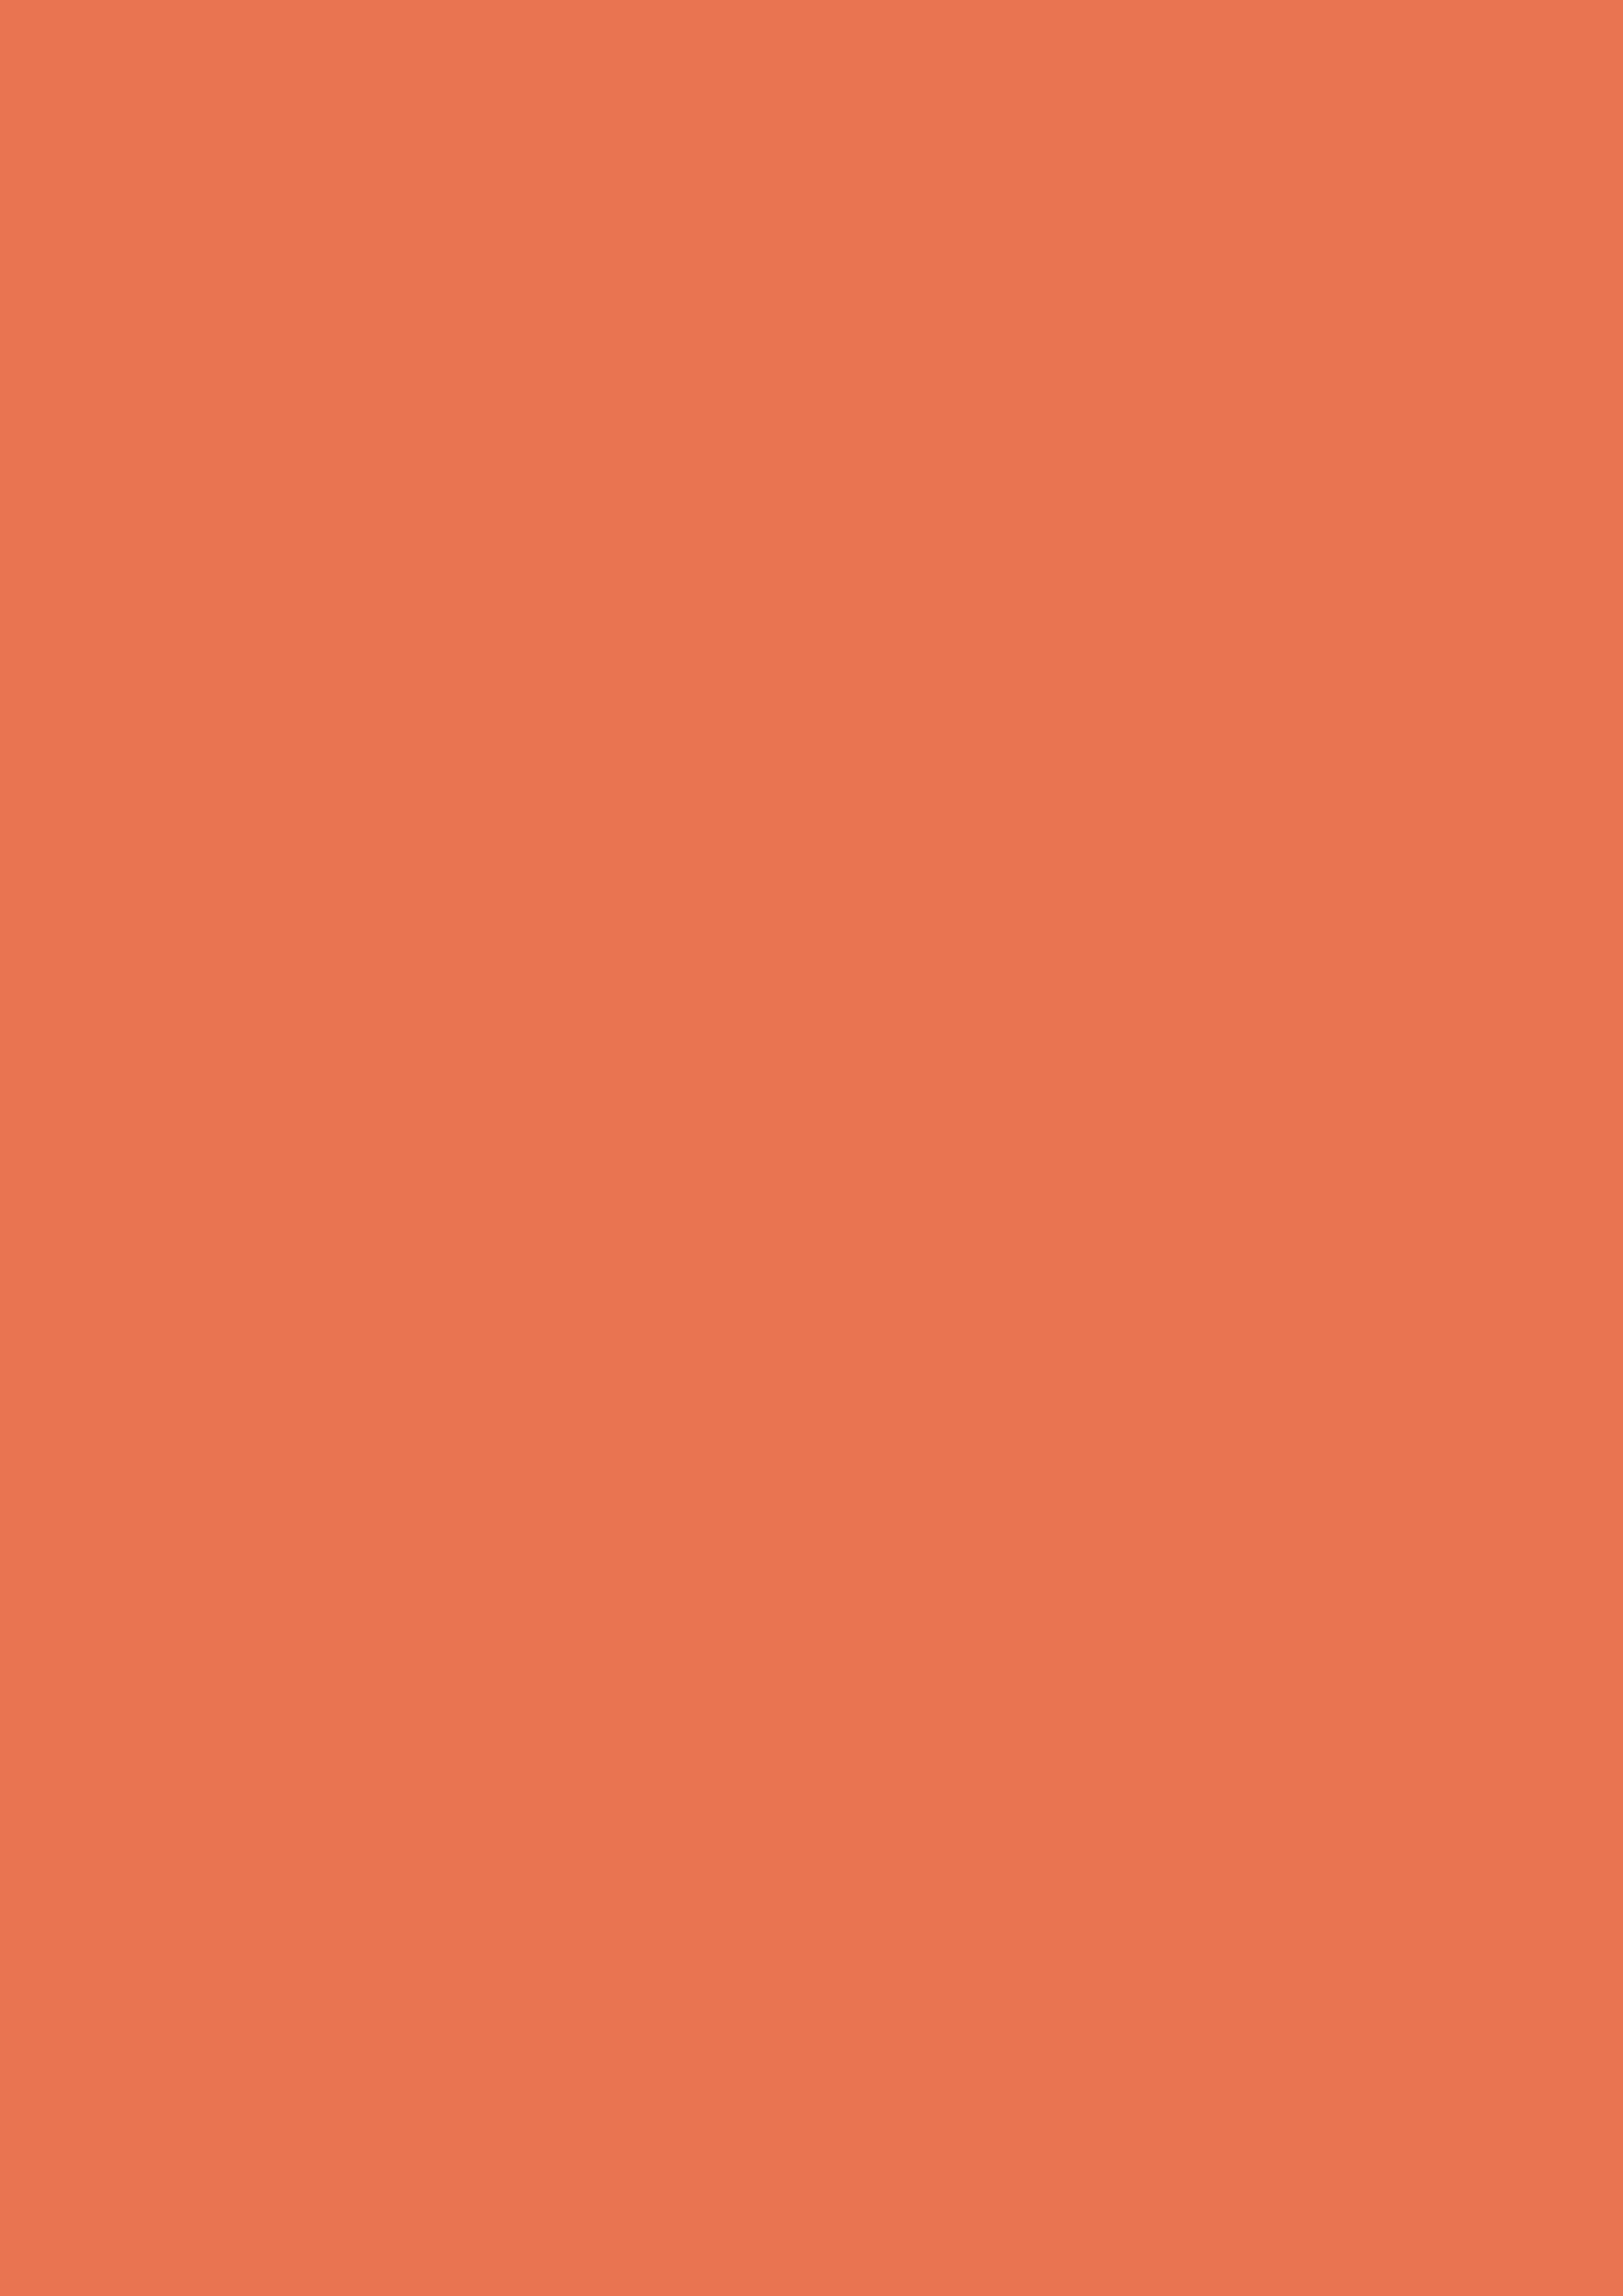 2480x3508 Burnt Sienna Solid Color Background